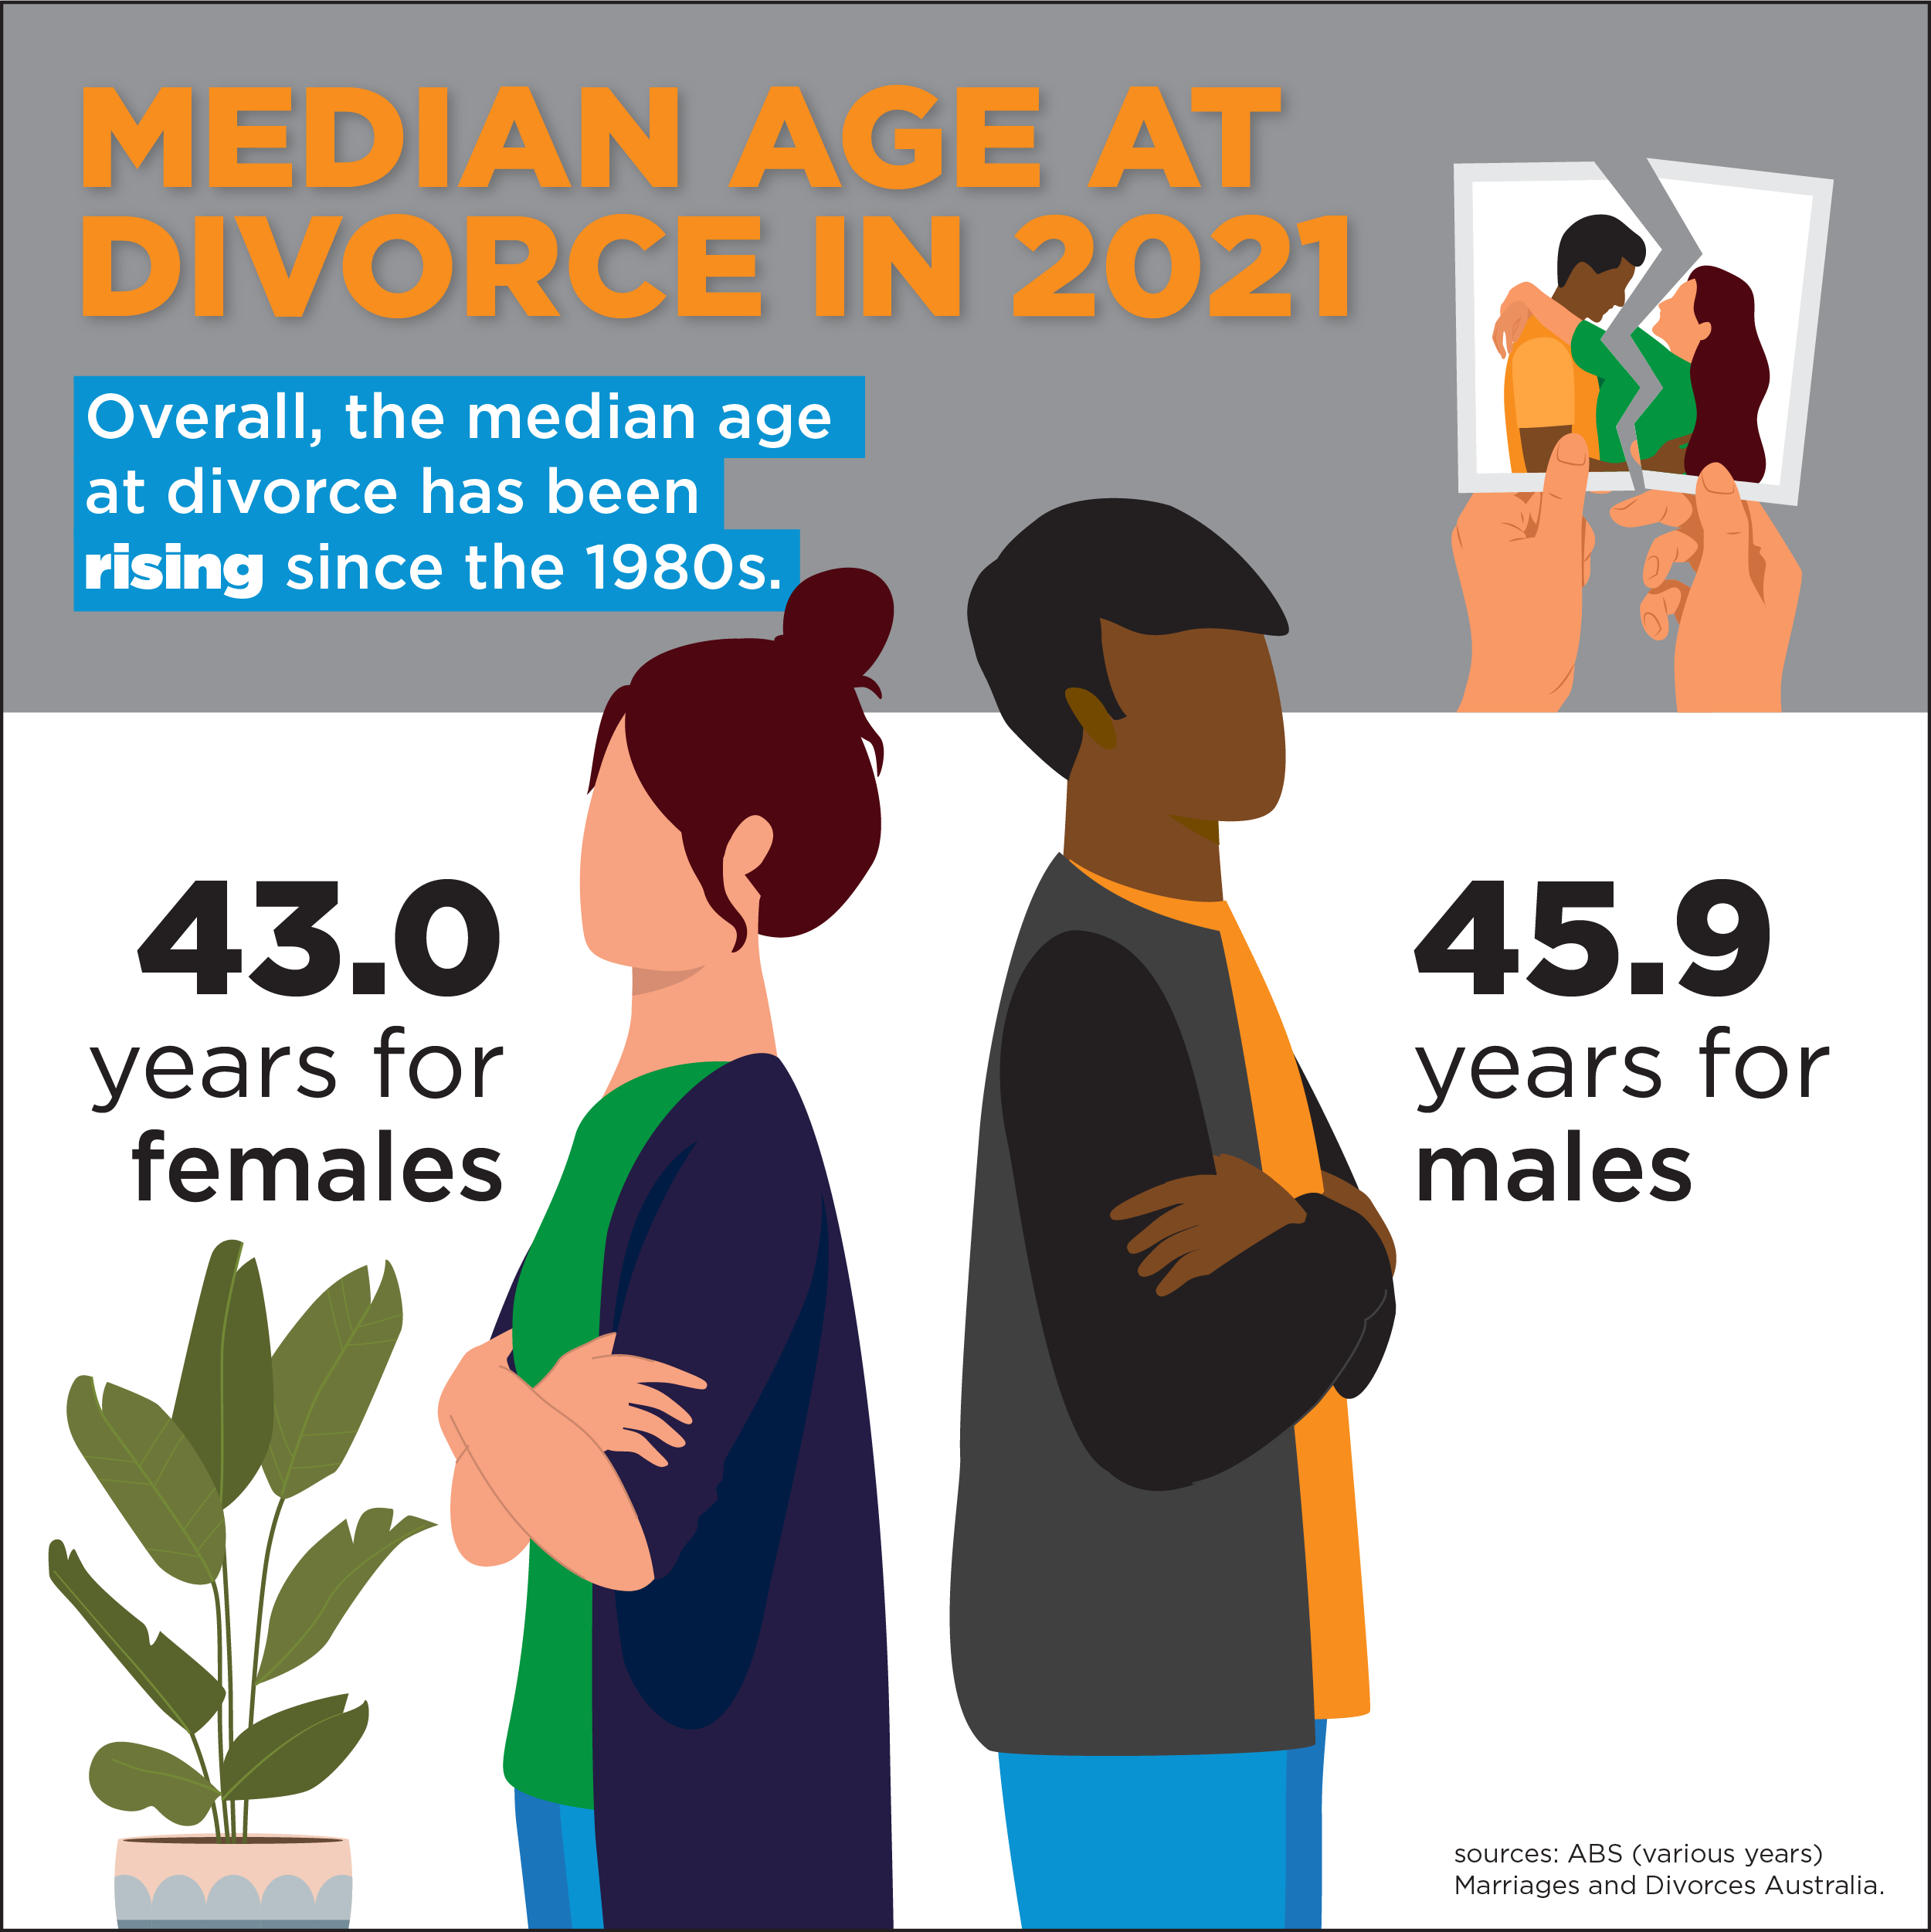 Median age at divorce in 2021 - Overall, the median age at divorce has been rising since the 1980s; 43.0 years for females and 45.9 years for males.